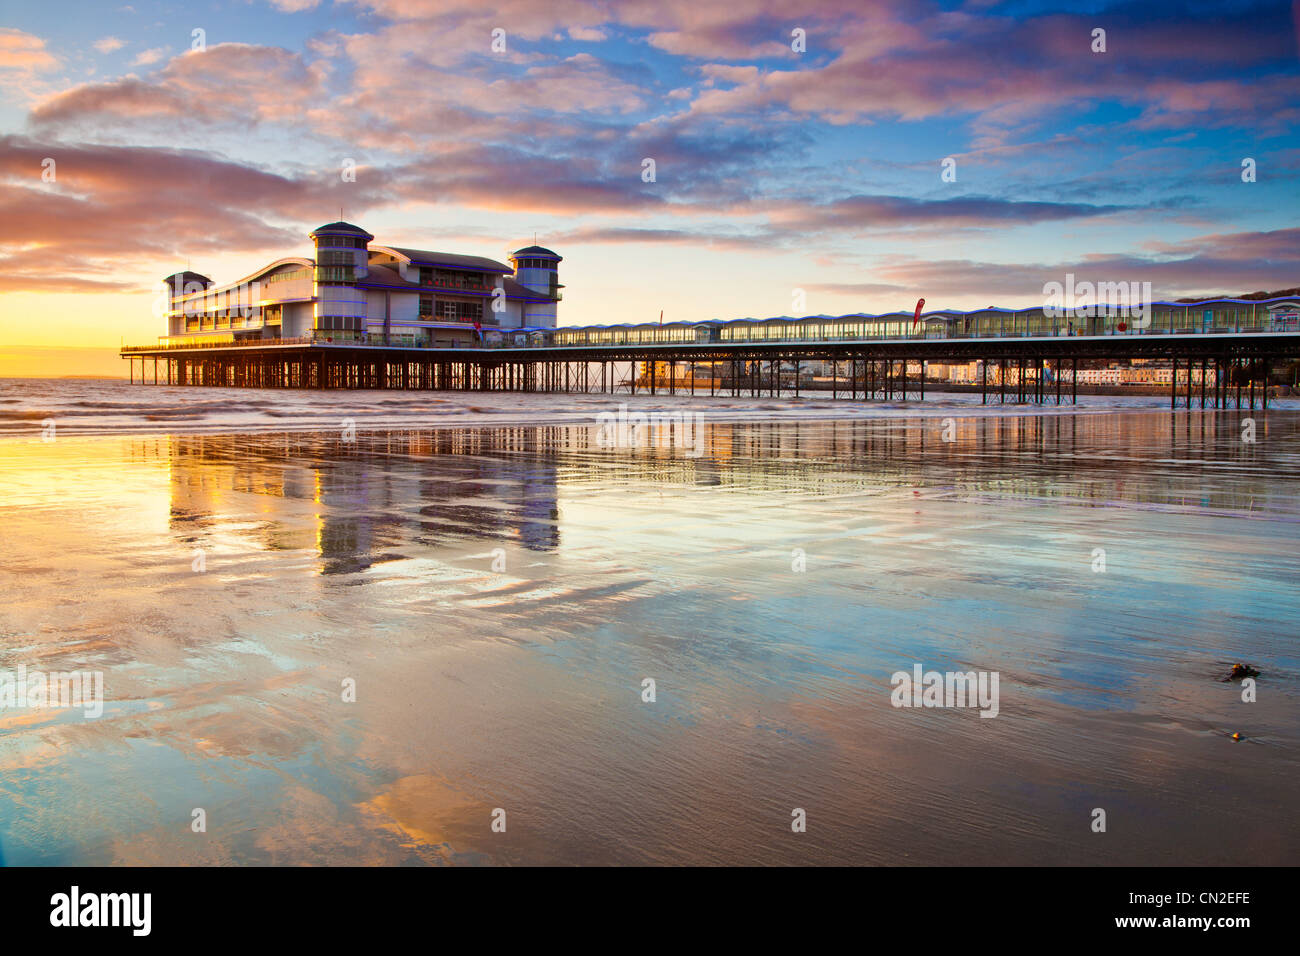 Sunset over the Grand Pier at Weston-Super-Mare, Somerset, England, UK reflected in the wet sand of the beach at high tide. Stock Photo